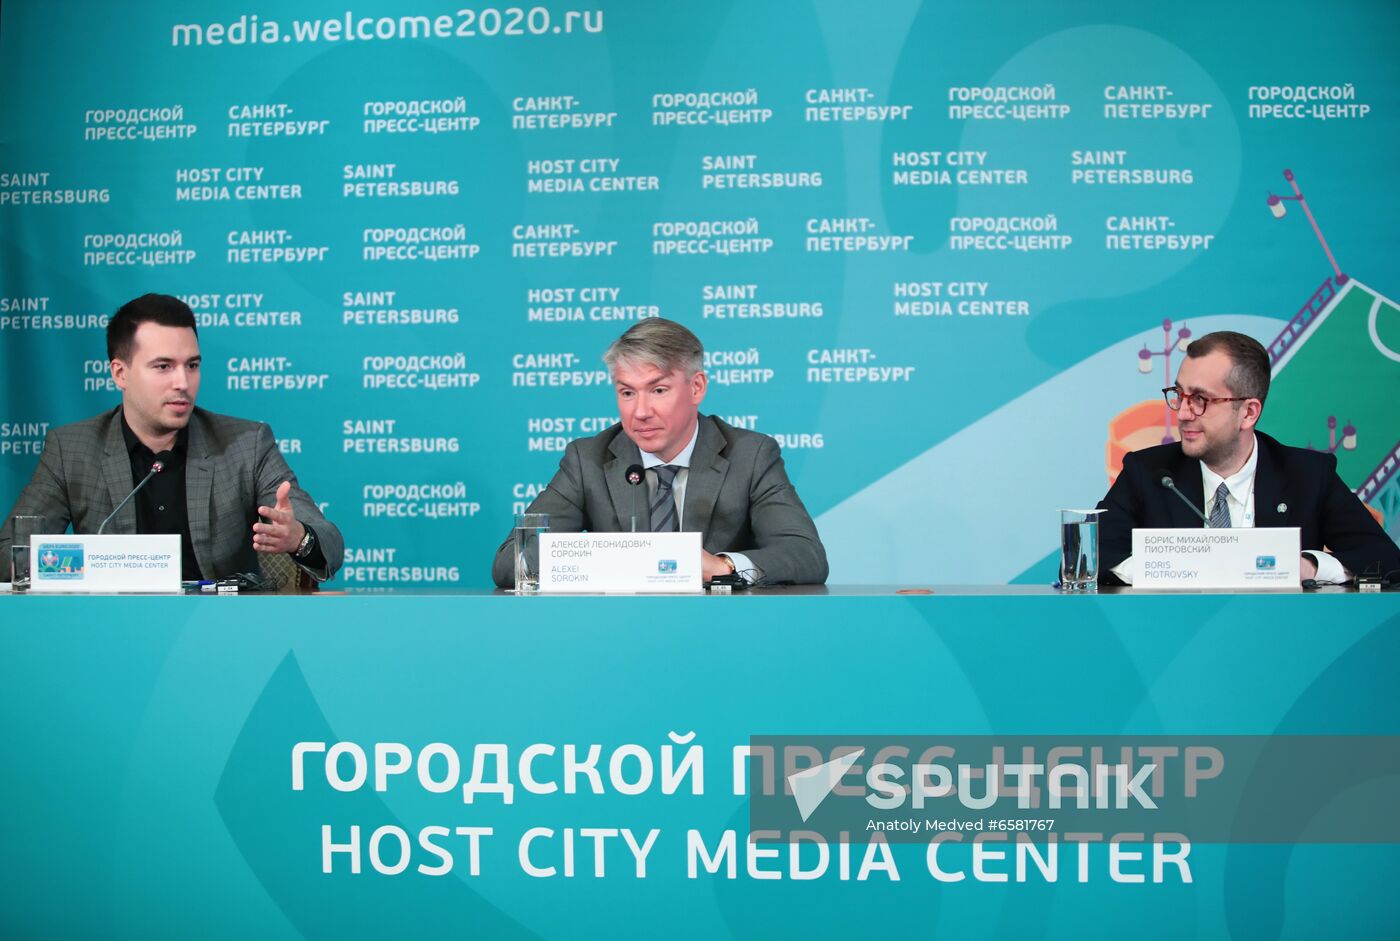 News conference following EURO 2020 group stage in St. Petersburg